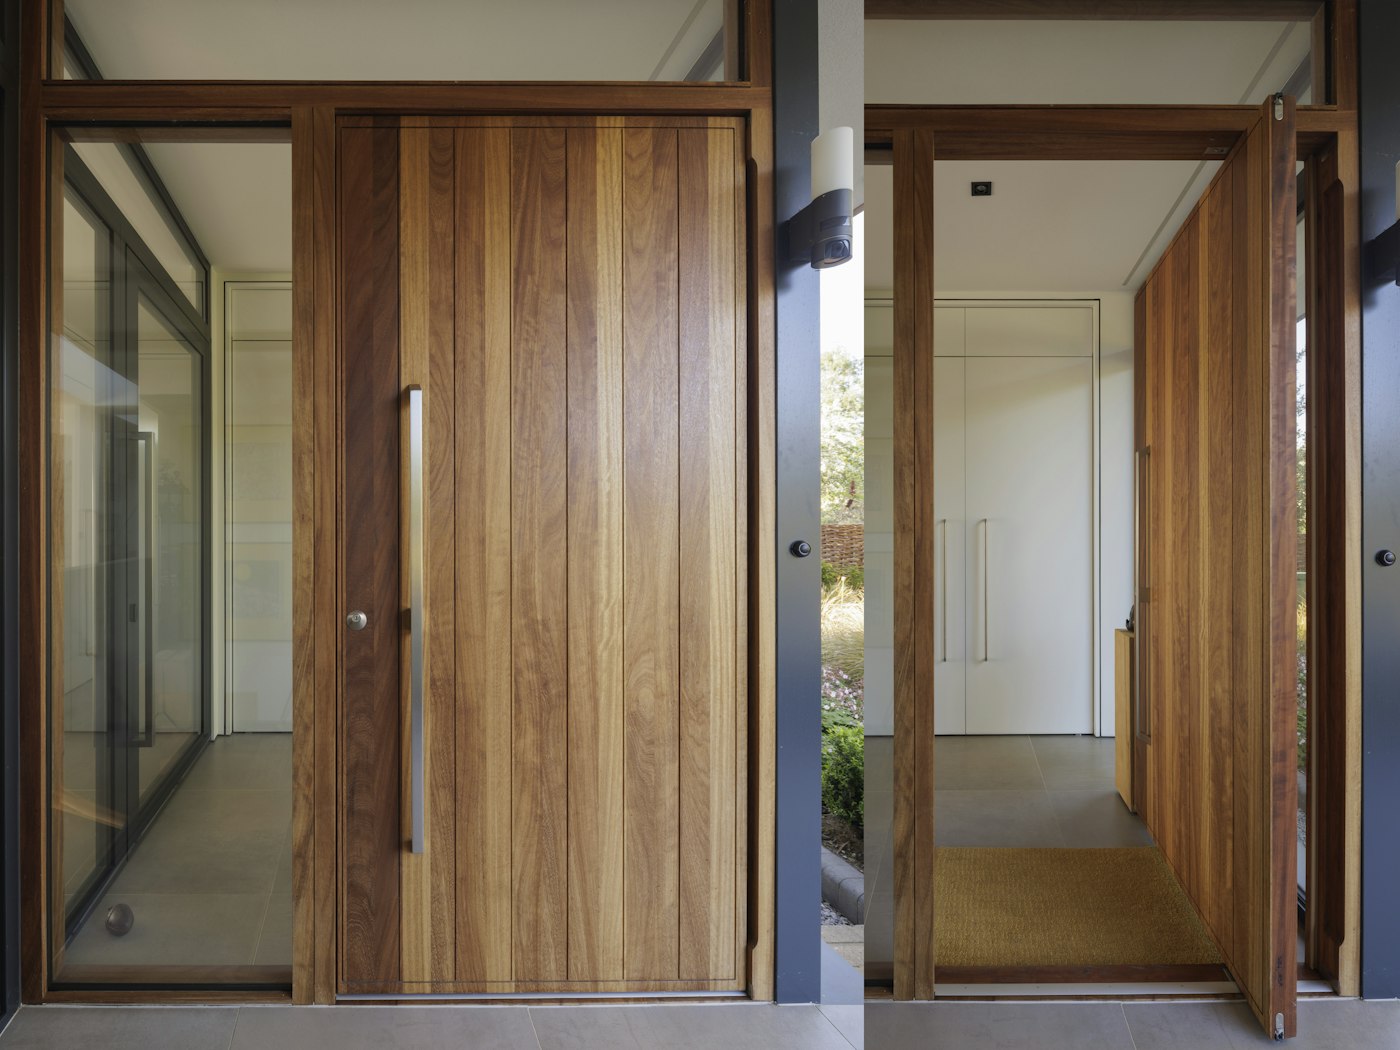 Our Porto design with a pivot opening and surrounded by glass - this entrance makes a modern statement